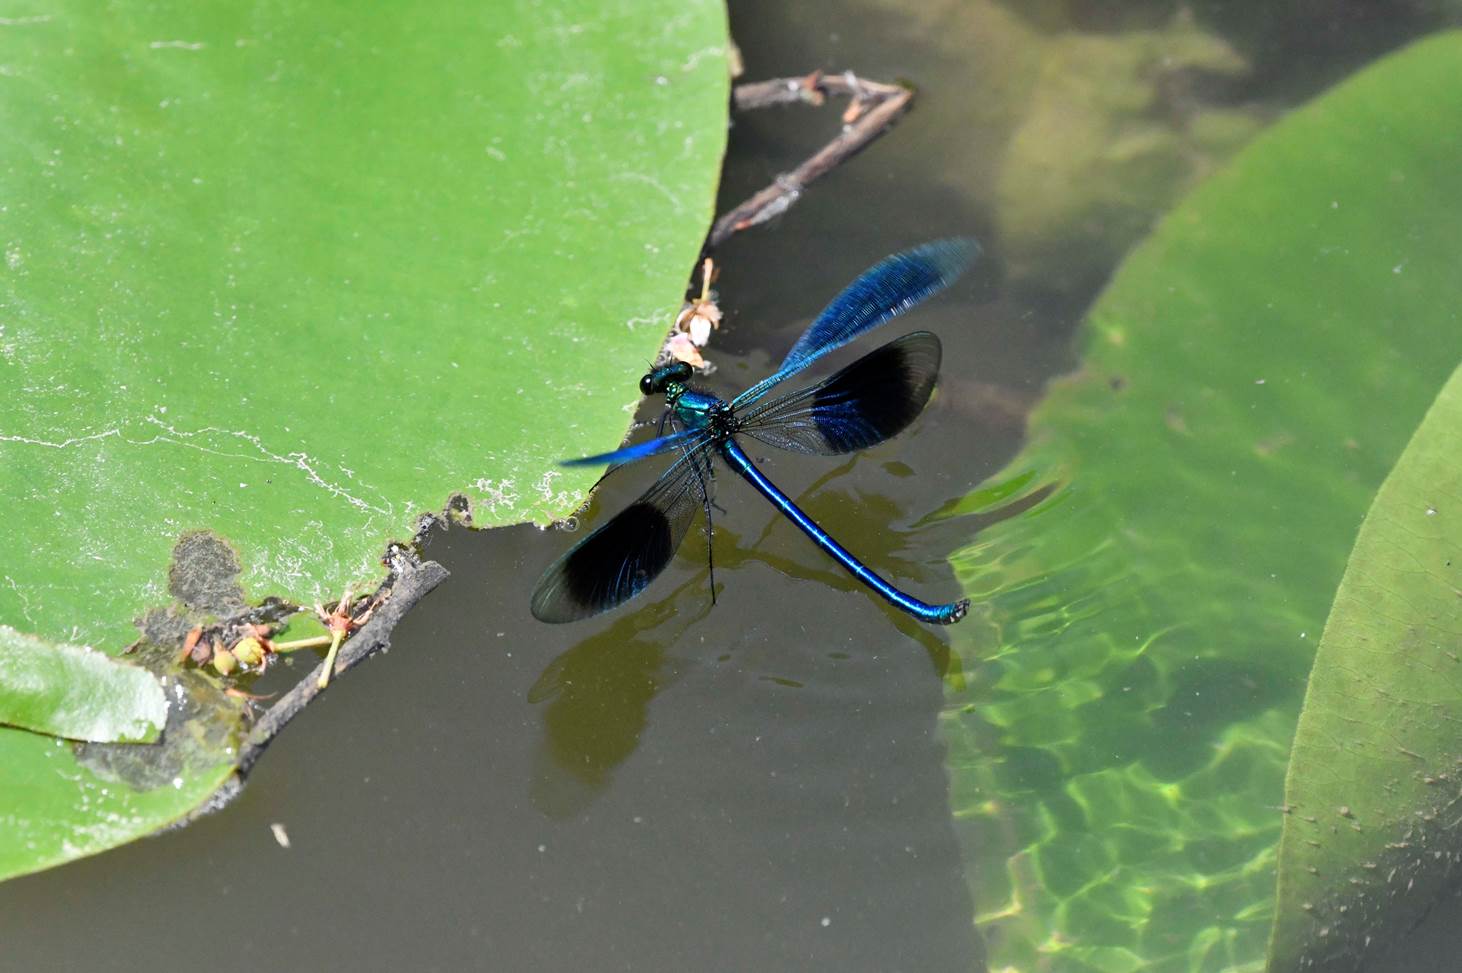 A dragonfly on a lily pad

Description automatically generated